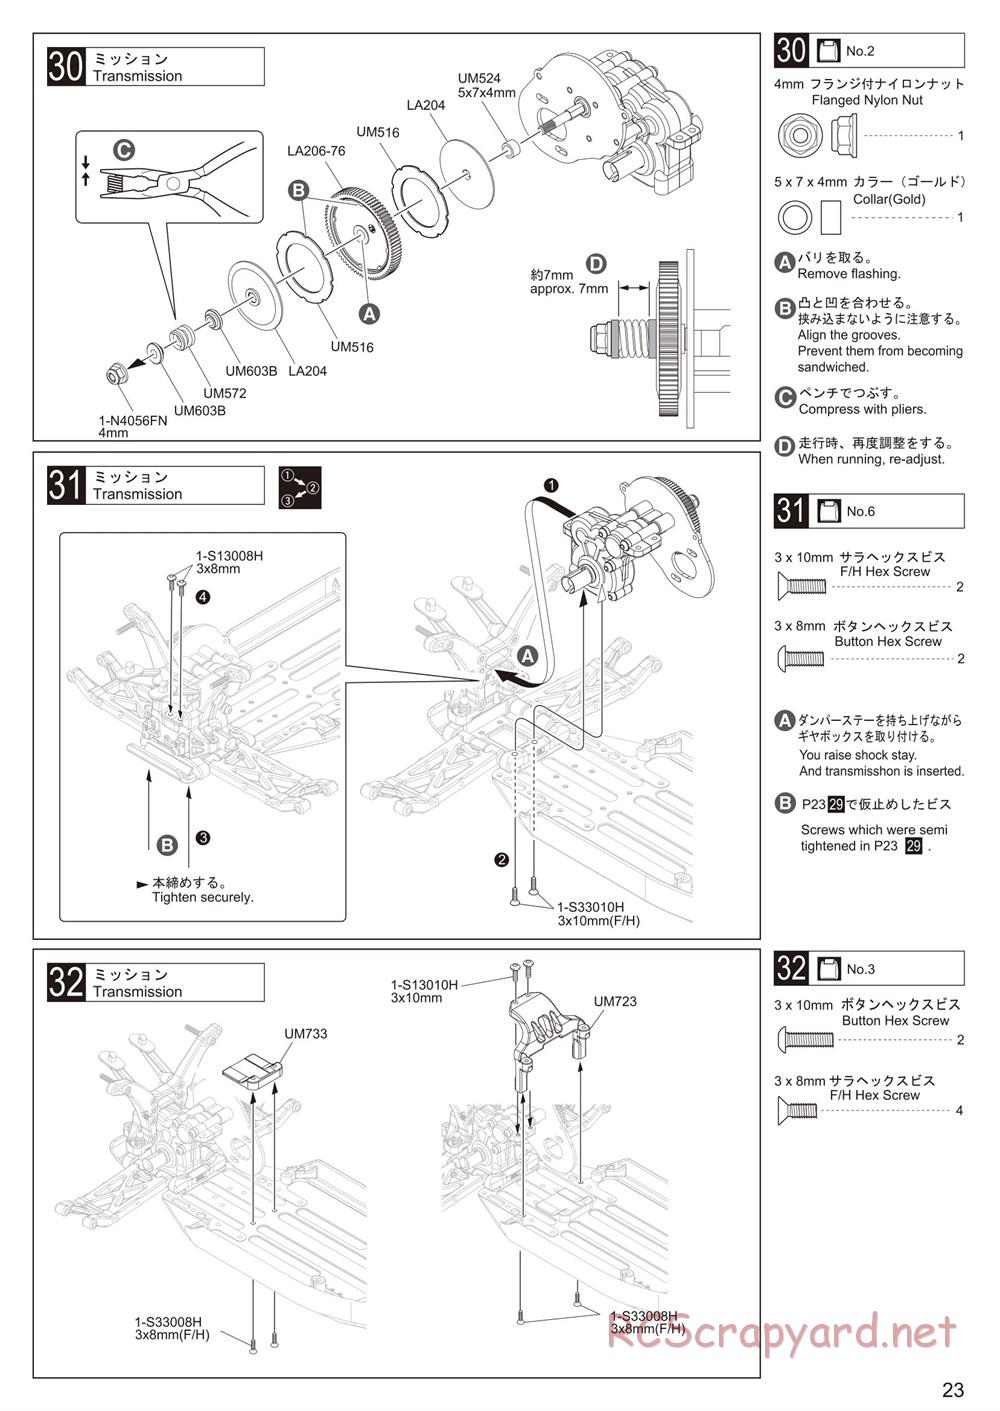 Kyosho - Ultima RB6.6 - Manual - Page 23